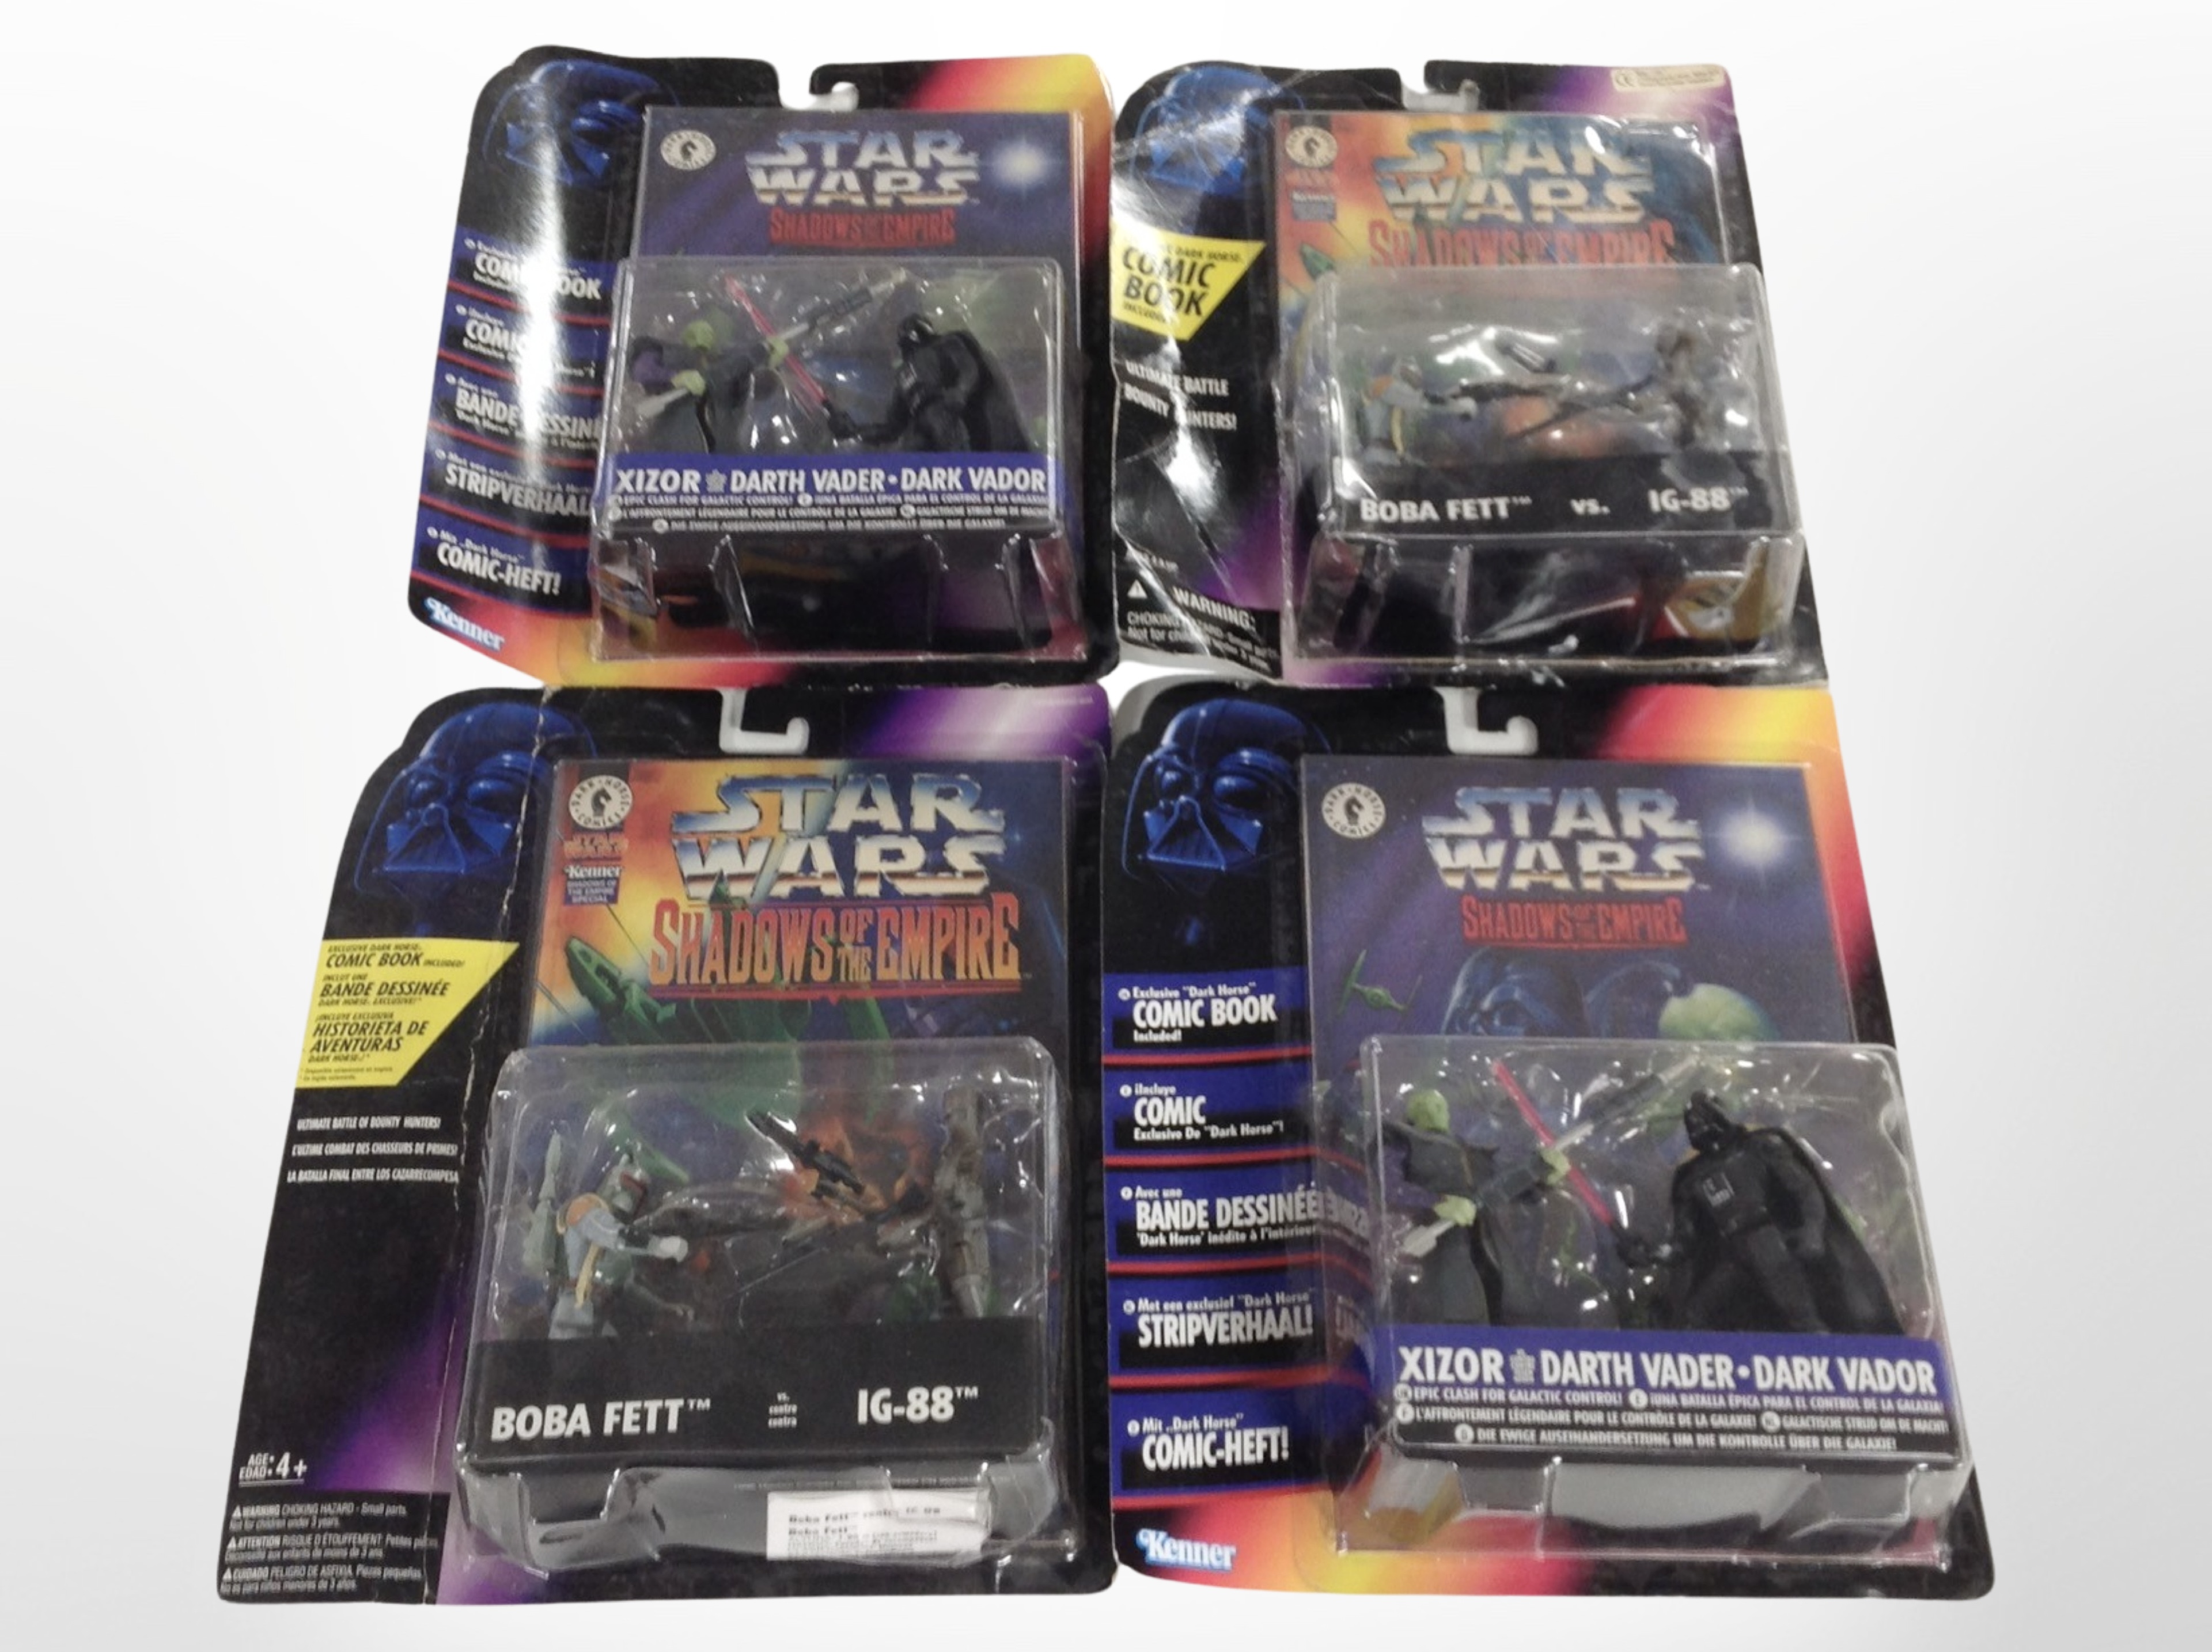 Four Kenner Star Wars Shadows of the Empire figures,